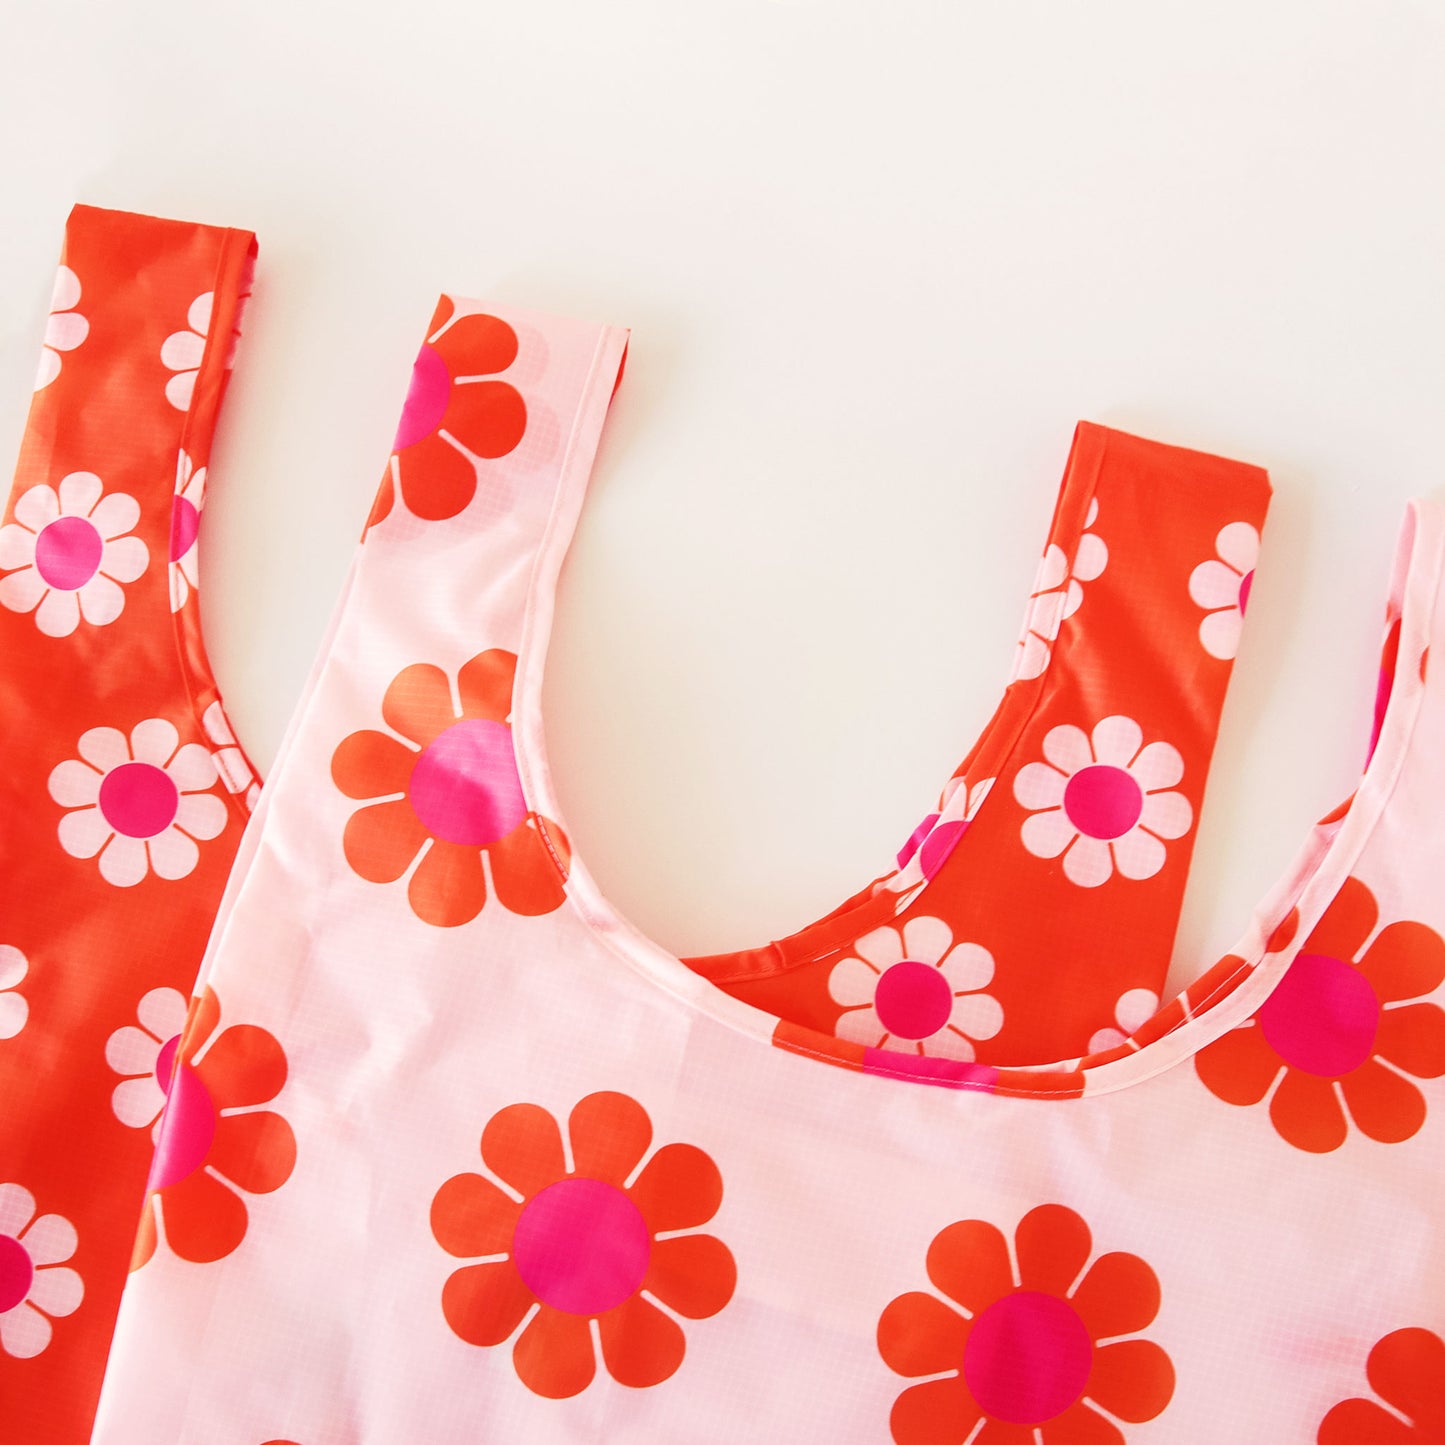 Two nylon bags layered on top of each other. Both bags have a similar print of daisy flowers. The bag layered below is red-orange with peach and pink flowers and the bag above is peach with pink and red-orange flowers.